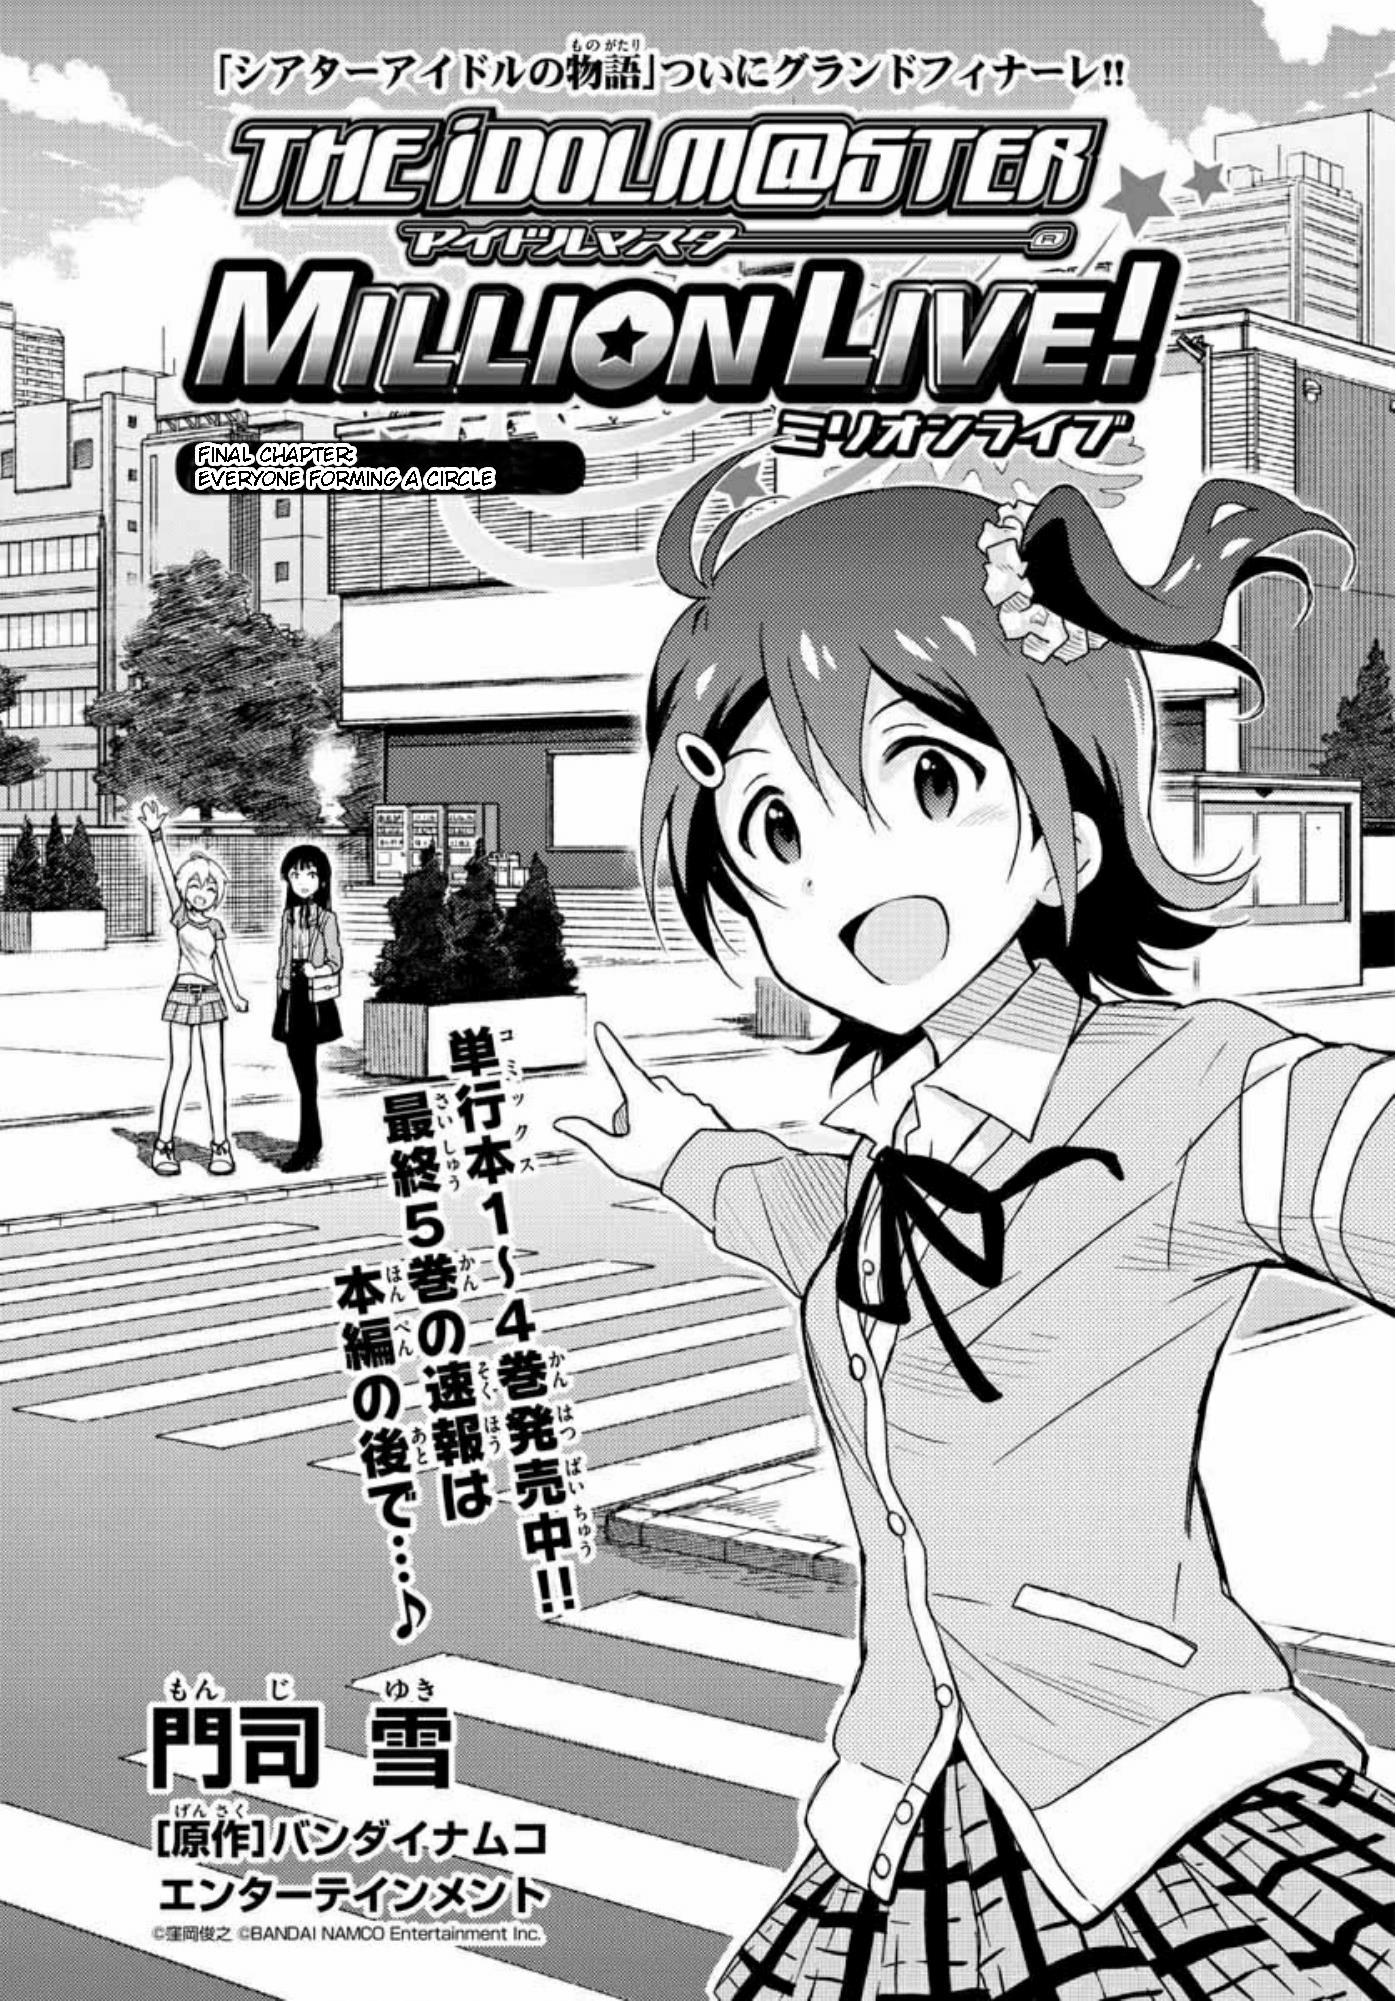 THE iDOLM@STER - Million Live! - episode 25 - 0